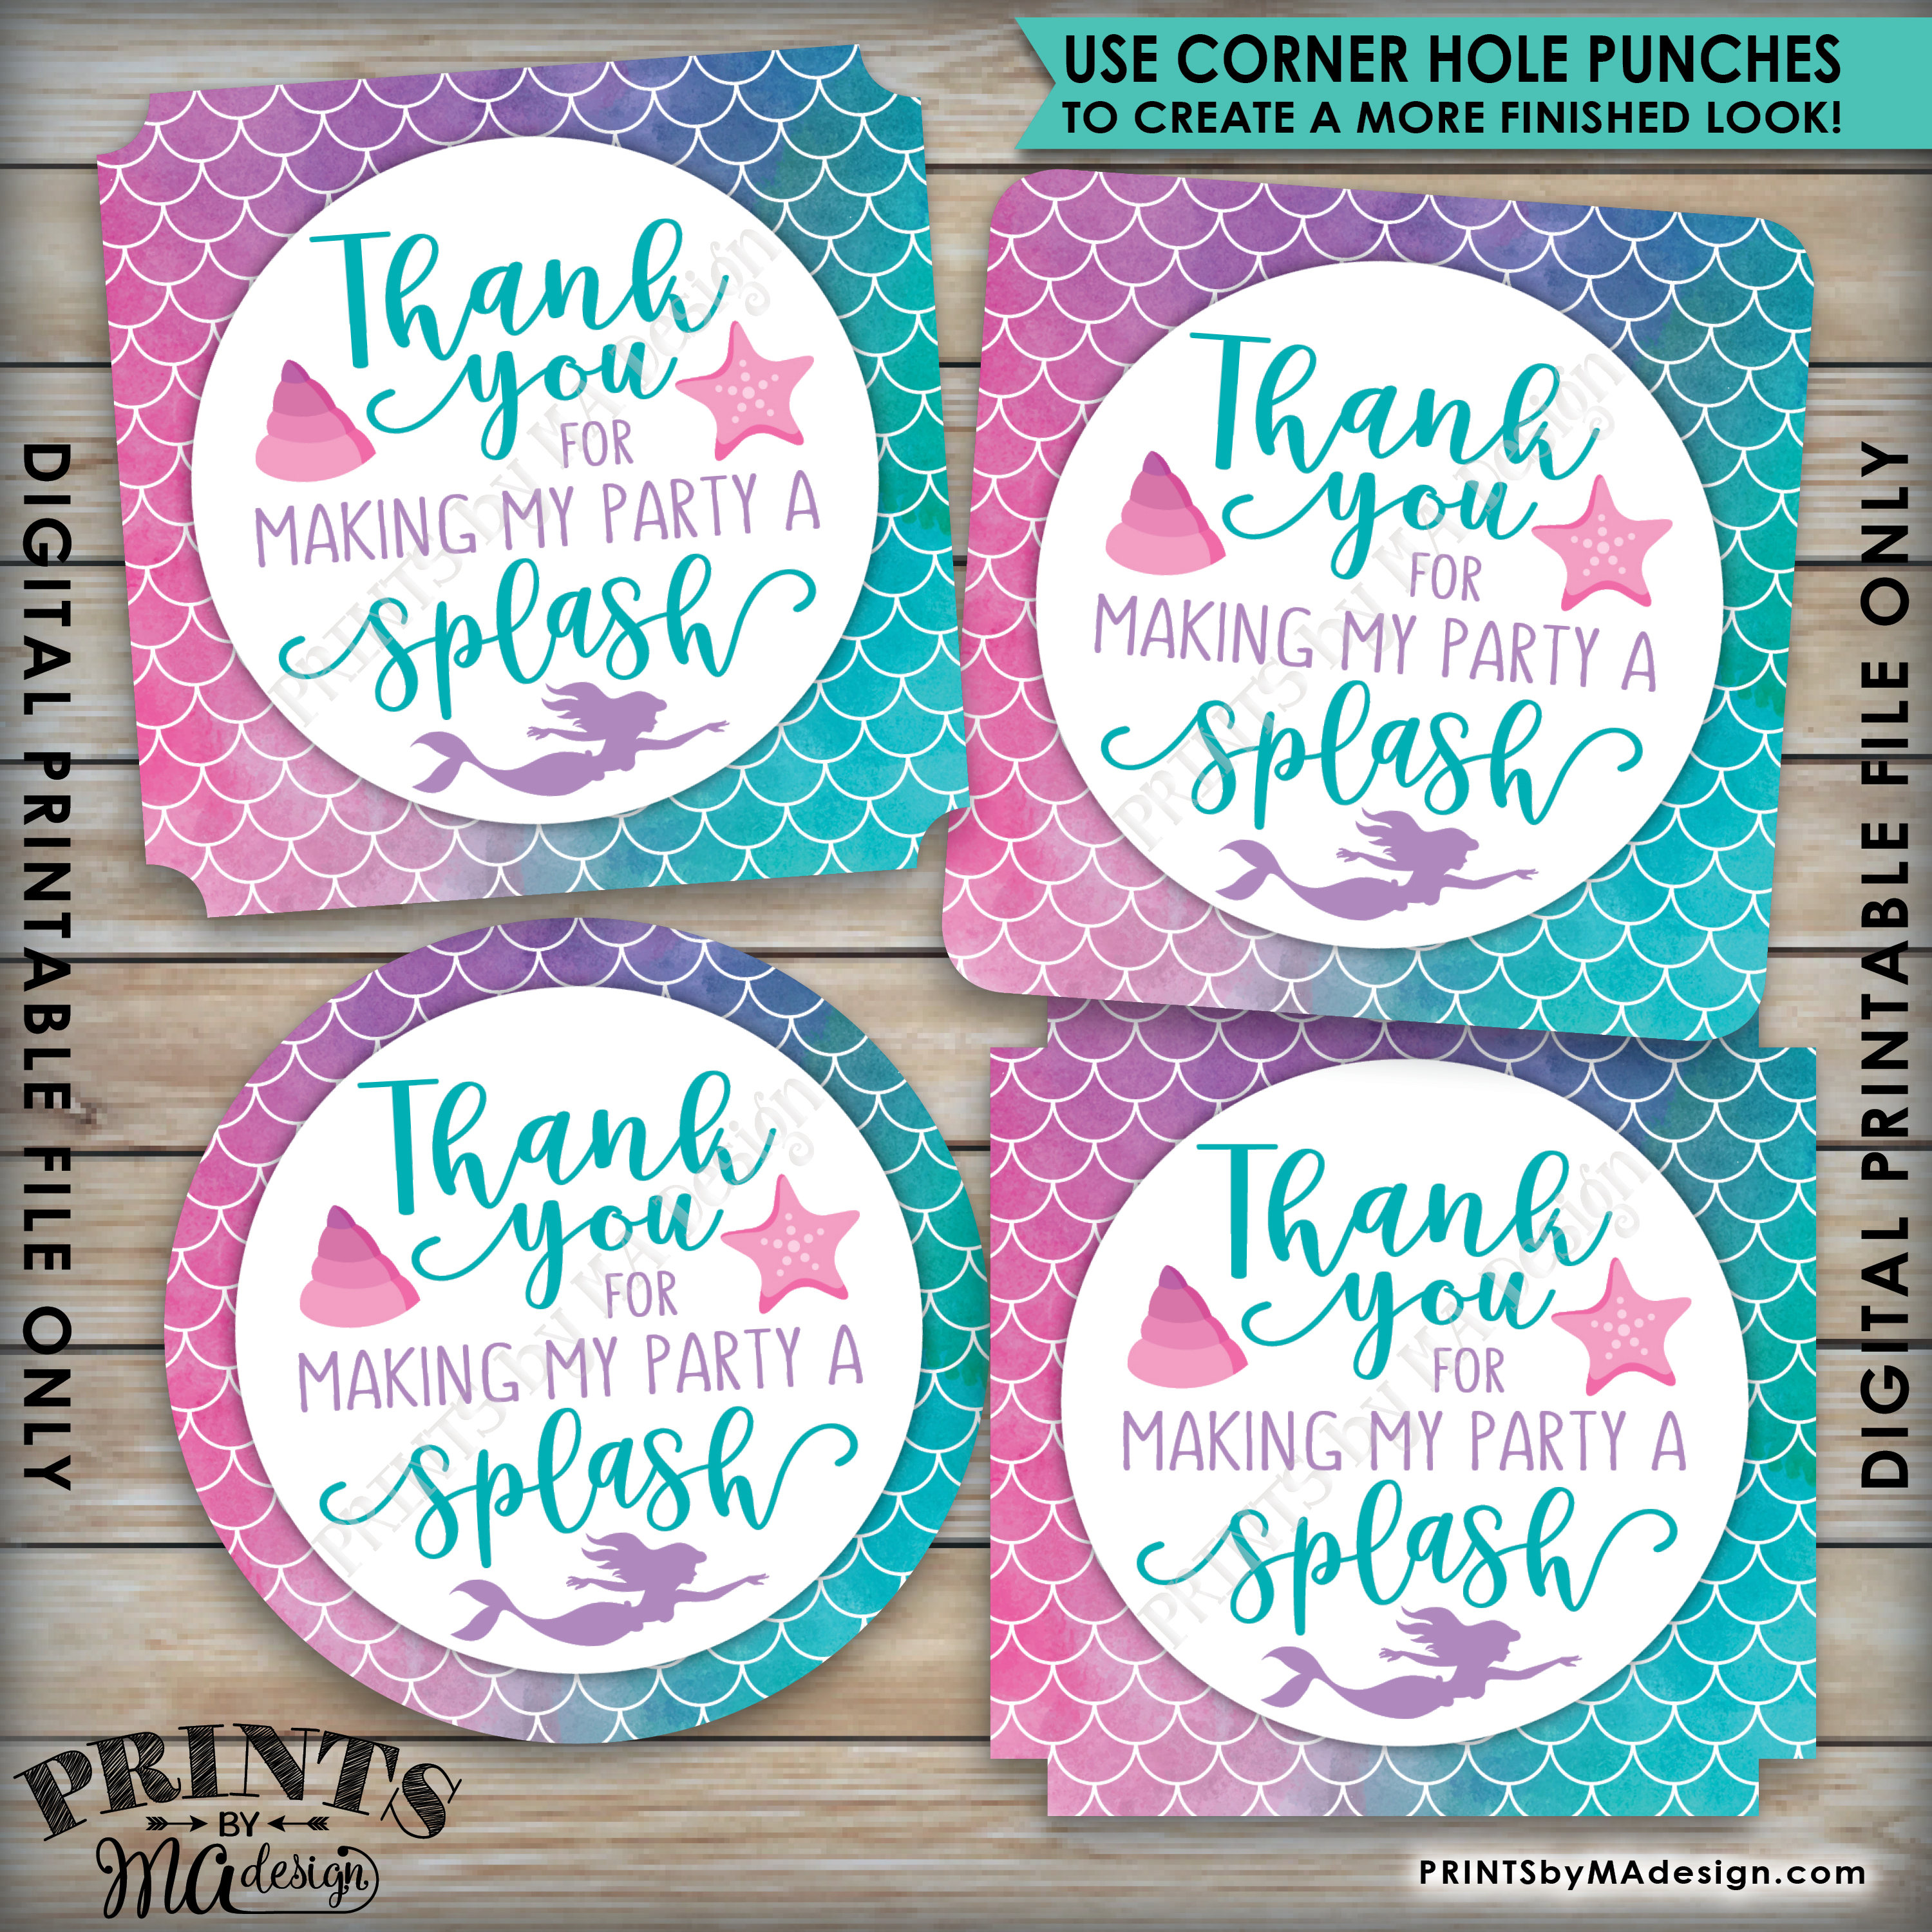 thanks-for-making-my-party-a-splash-free-printable-printable-templates